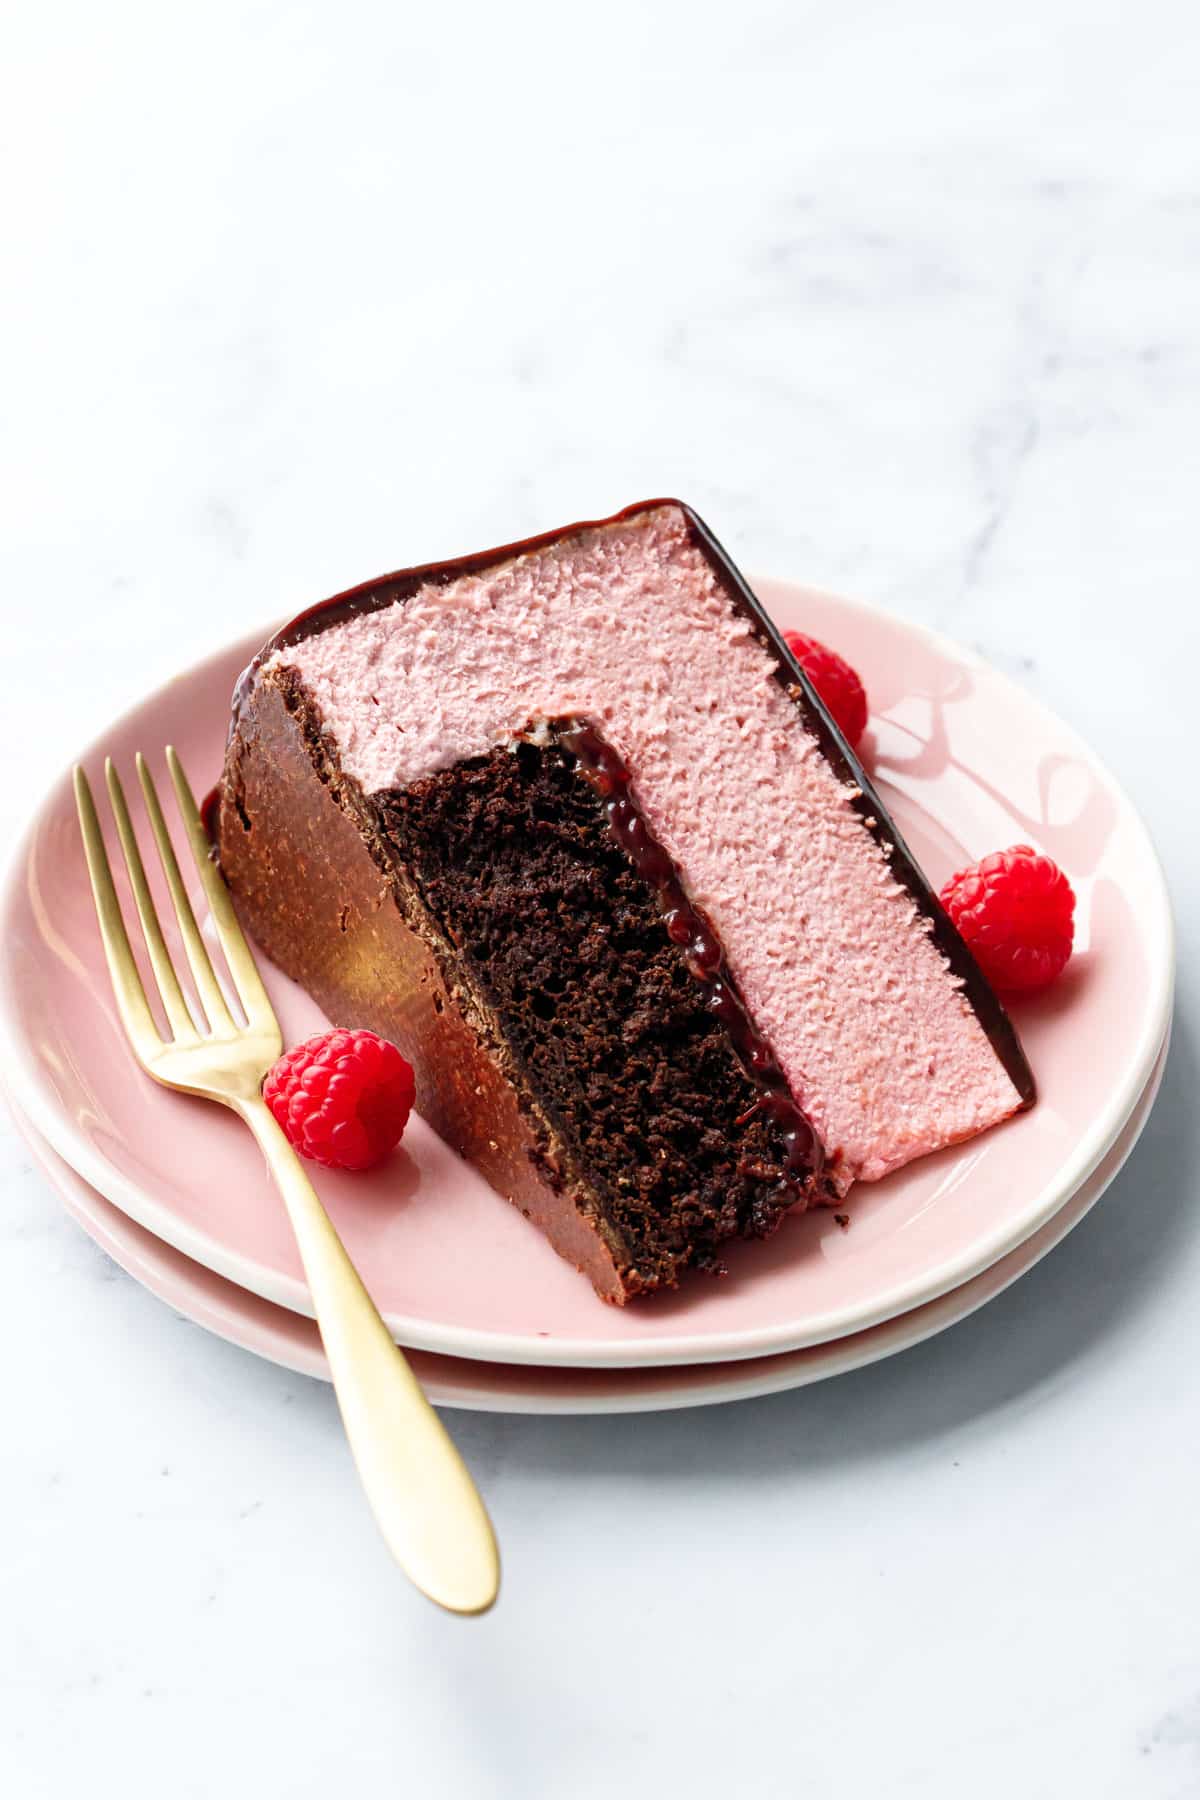 Slice of Chocolate Raspberry Mousse Cake laying on its side on a pink plate with raspberries and gold fork.